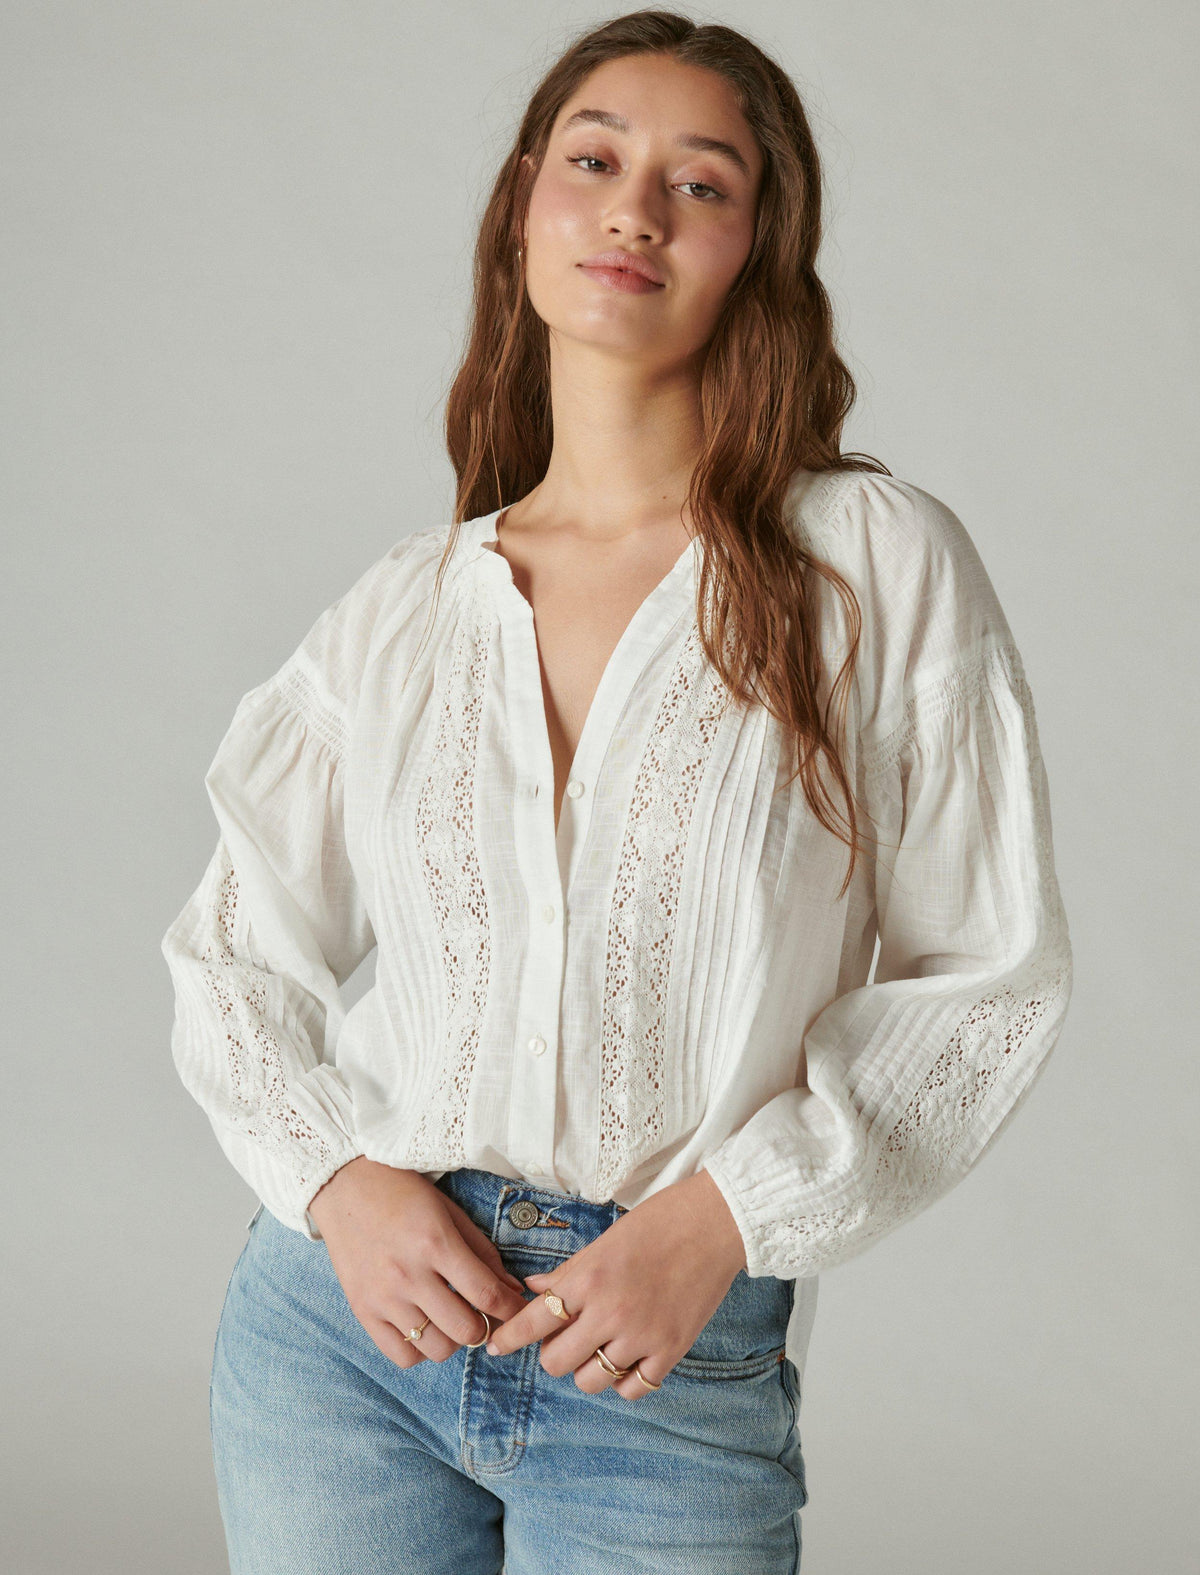 Lucky Brand Relaxed Lace Open Neckshirt - Women's Clothing Button Down Tops Shirts Bright White